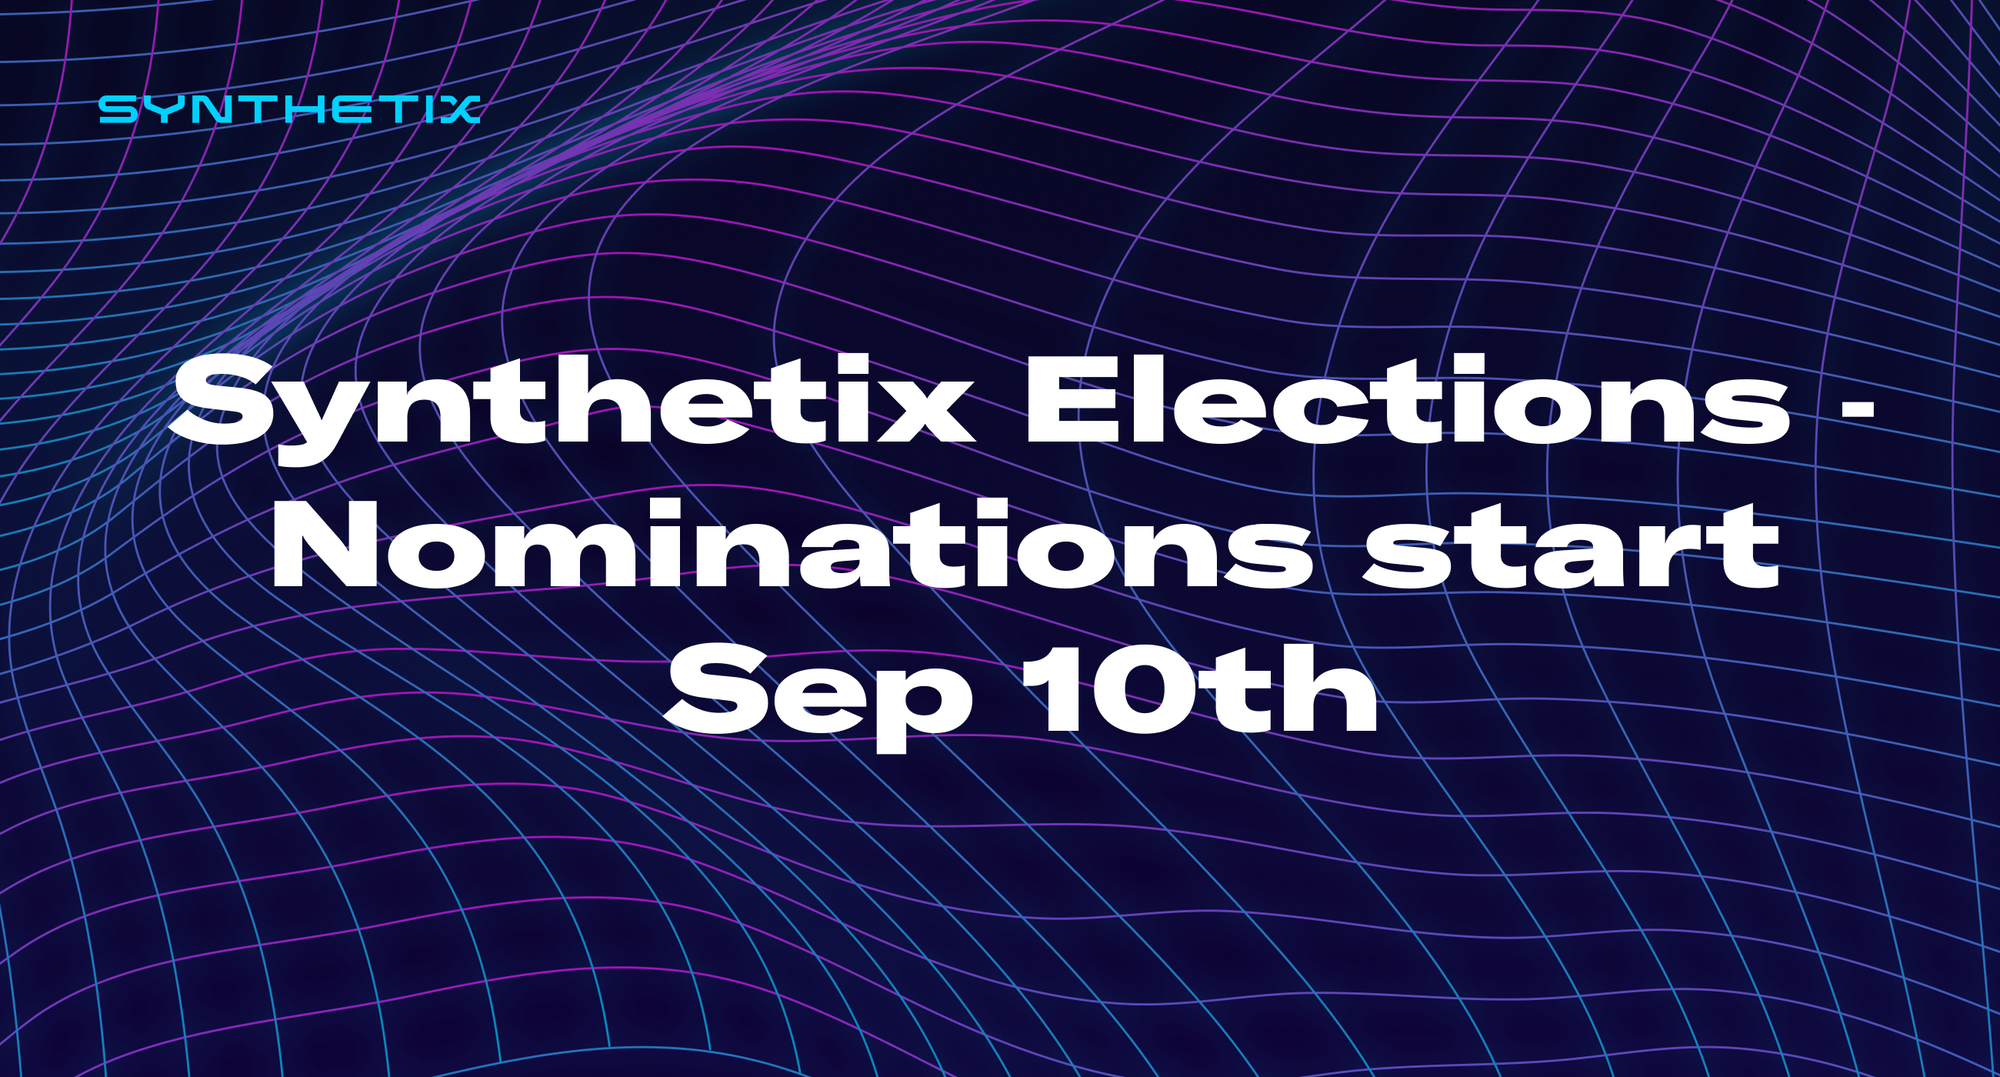 Synthetix Elections - Nominations start Sep 10th